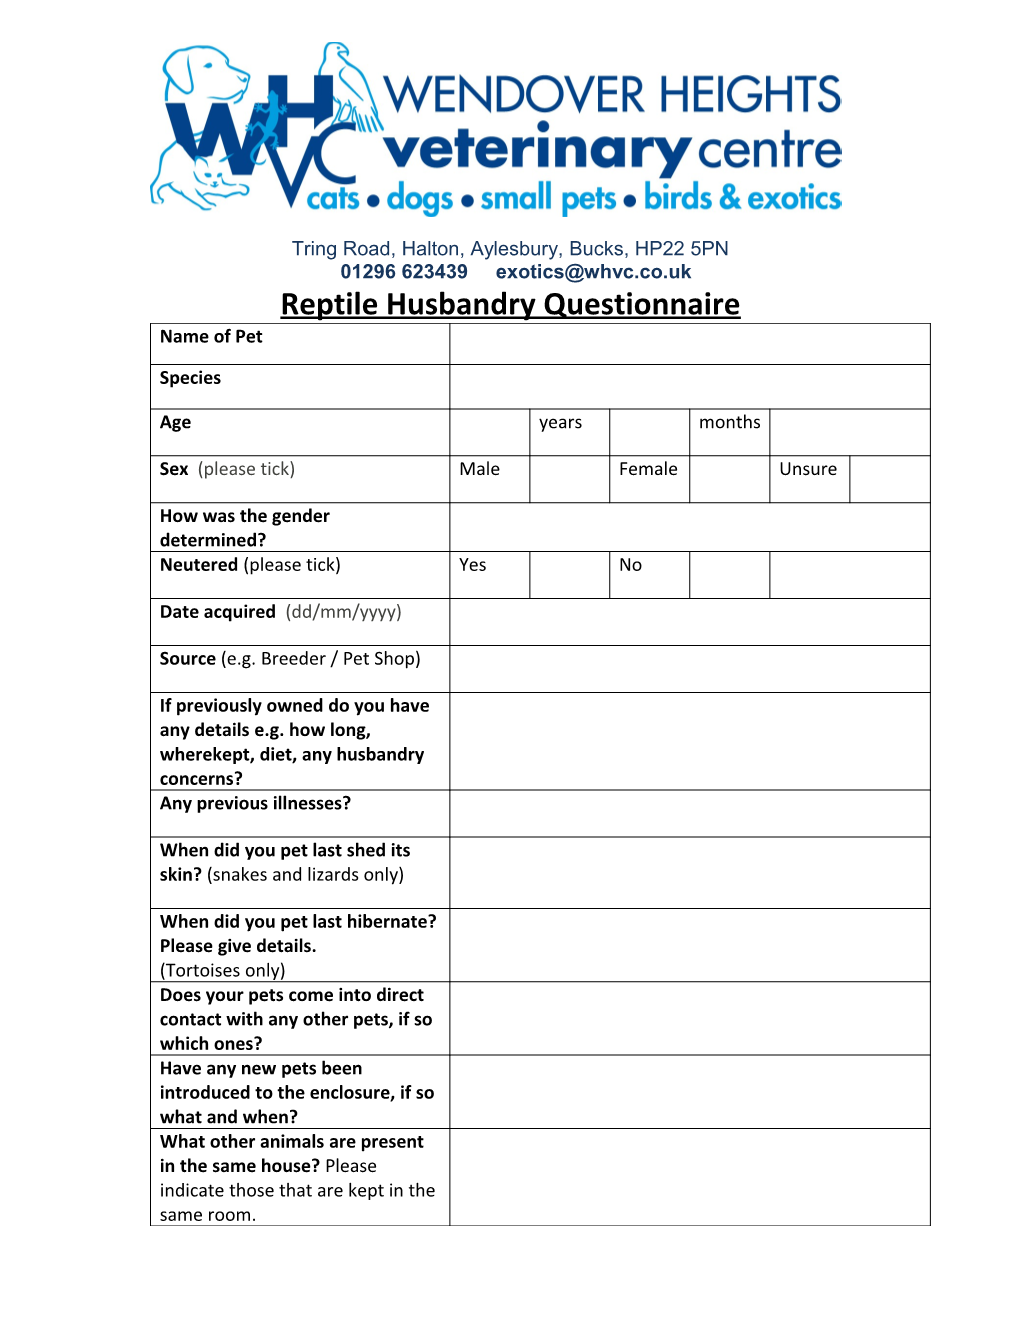 WHVC Reptile Husbandry Questionnaire